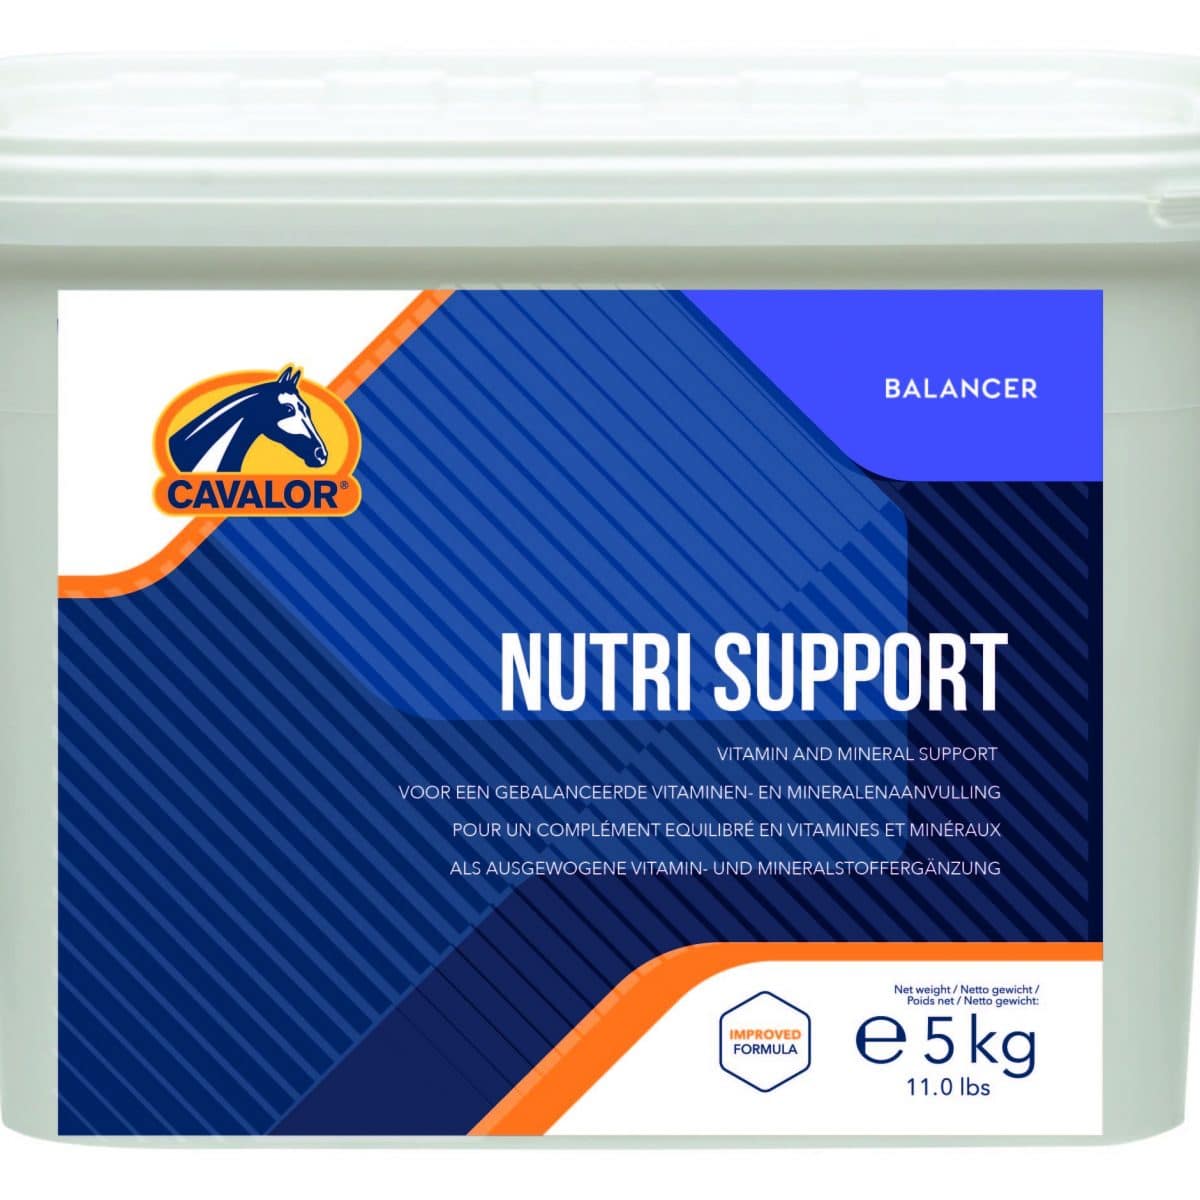 Nutri support